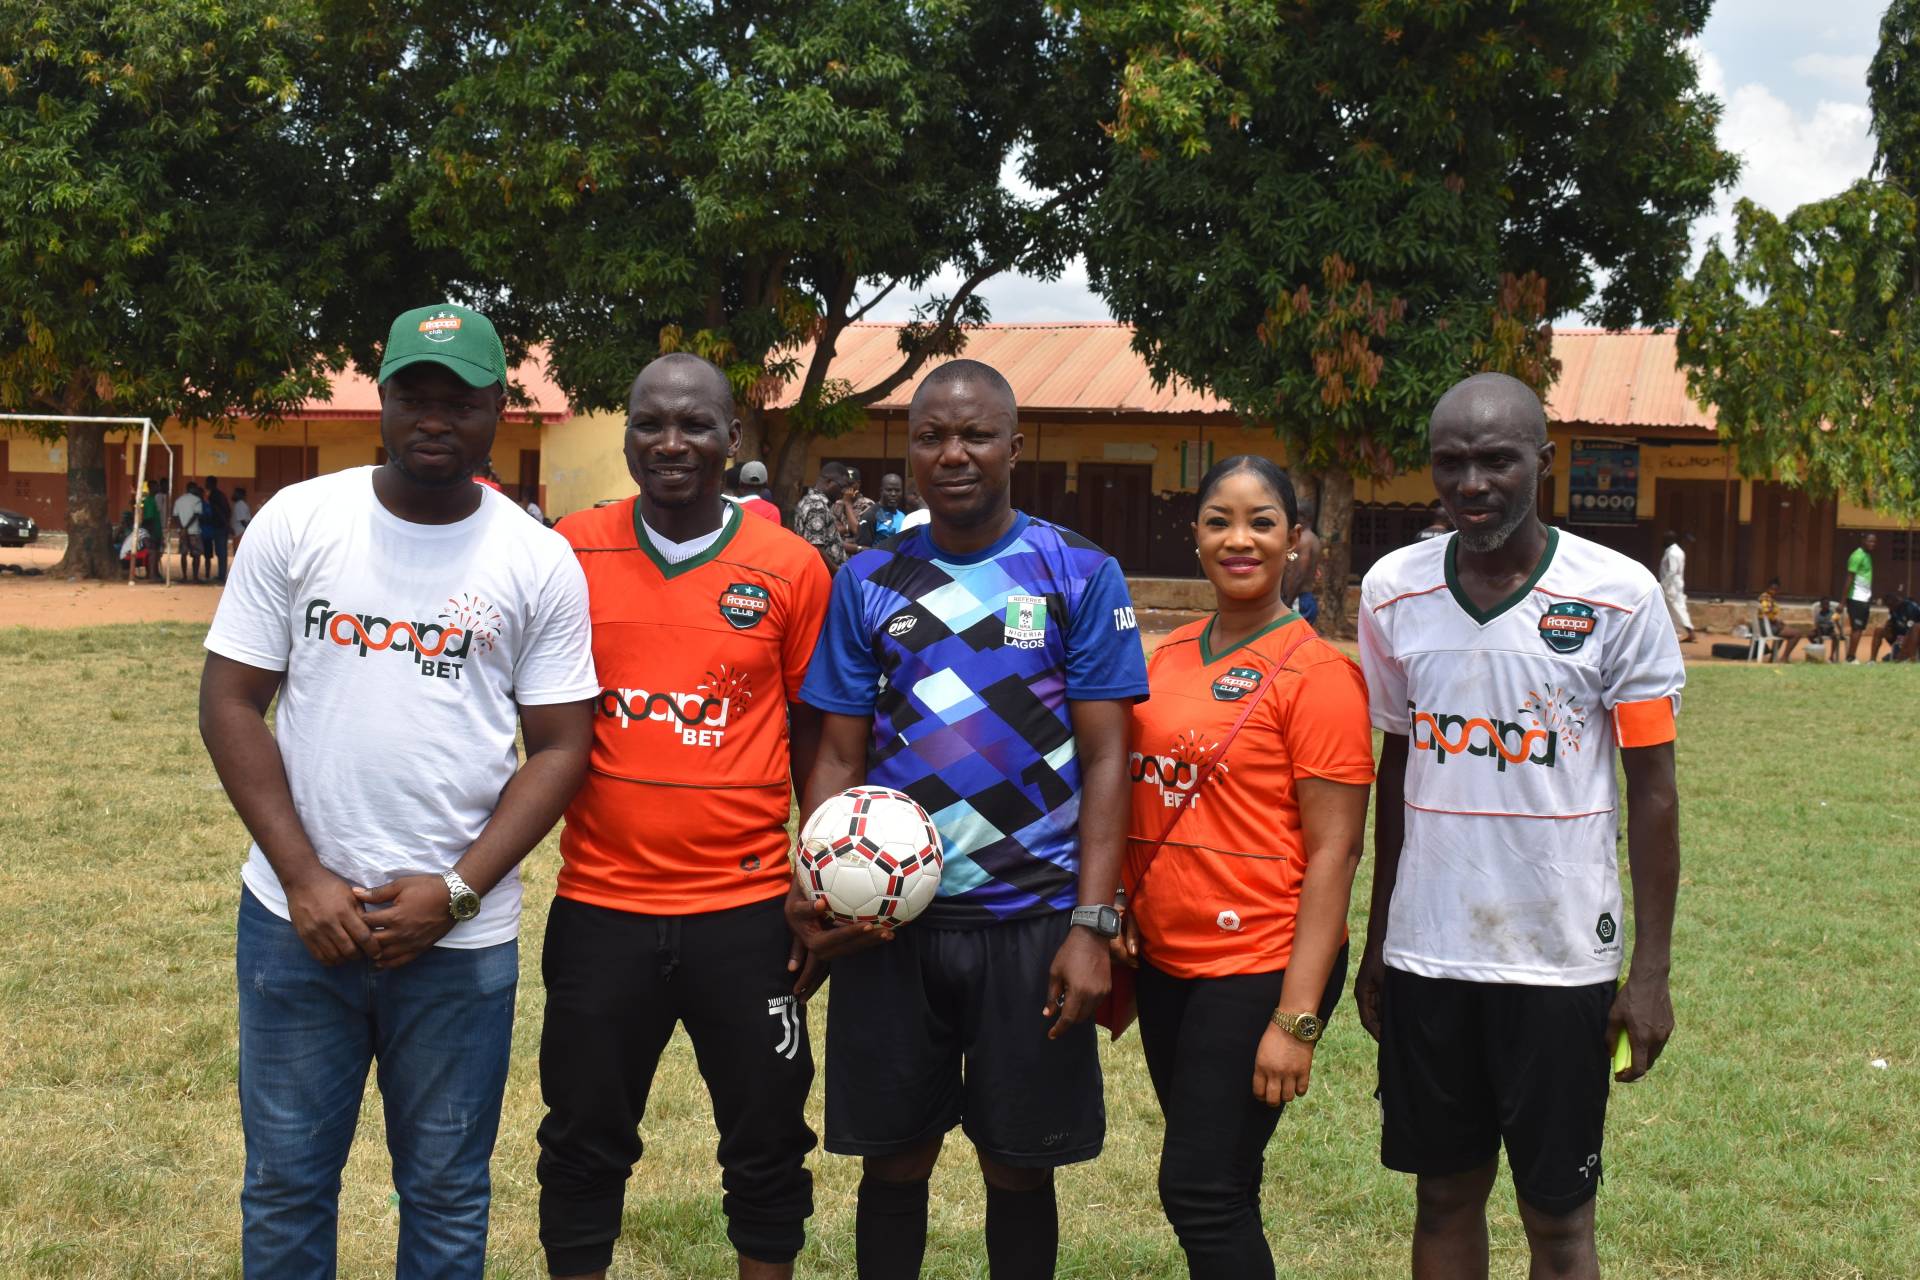 Frapapa officials with the match referee and both teams' captains